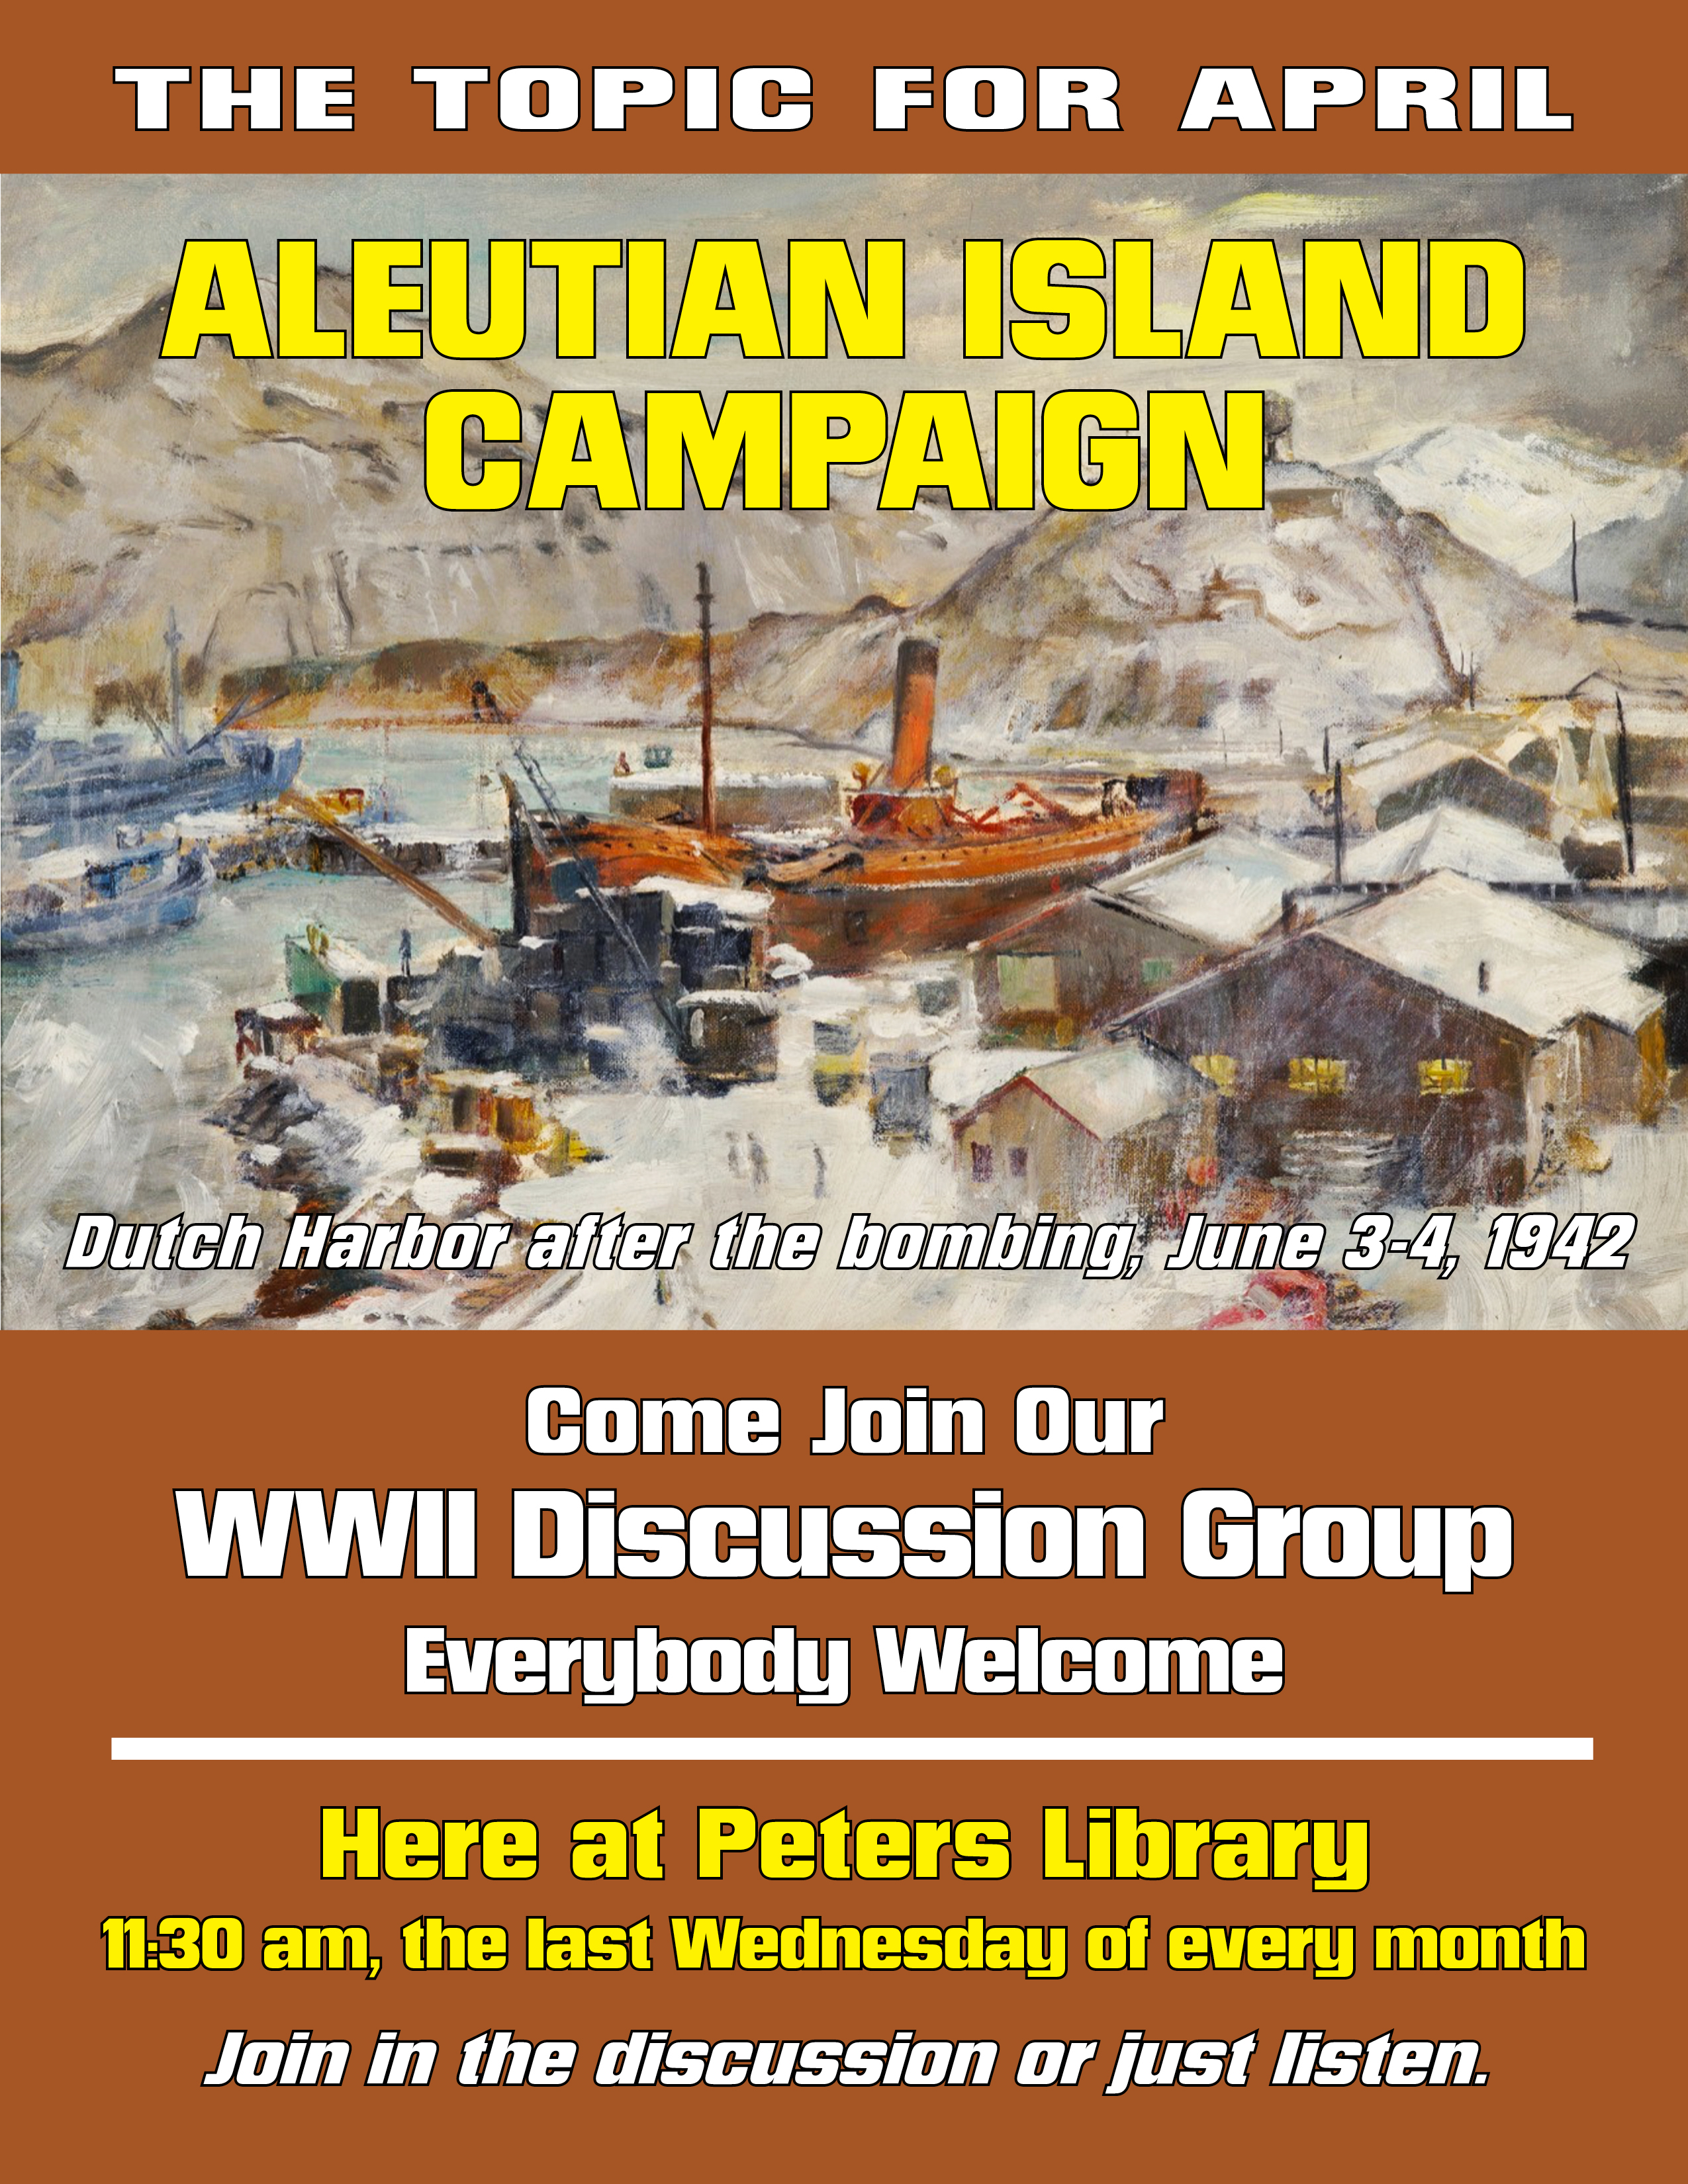 The topic for april: Aleutian Island Campaign. Come join our WW2 discussion group 11:30 am, last Wednesday of the month.